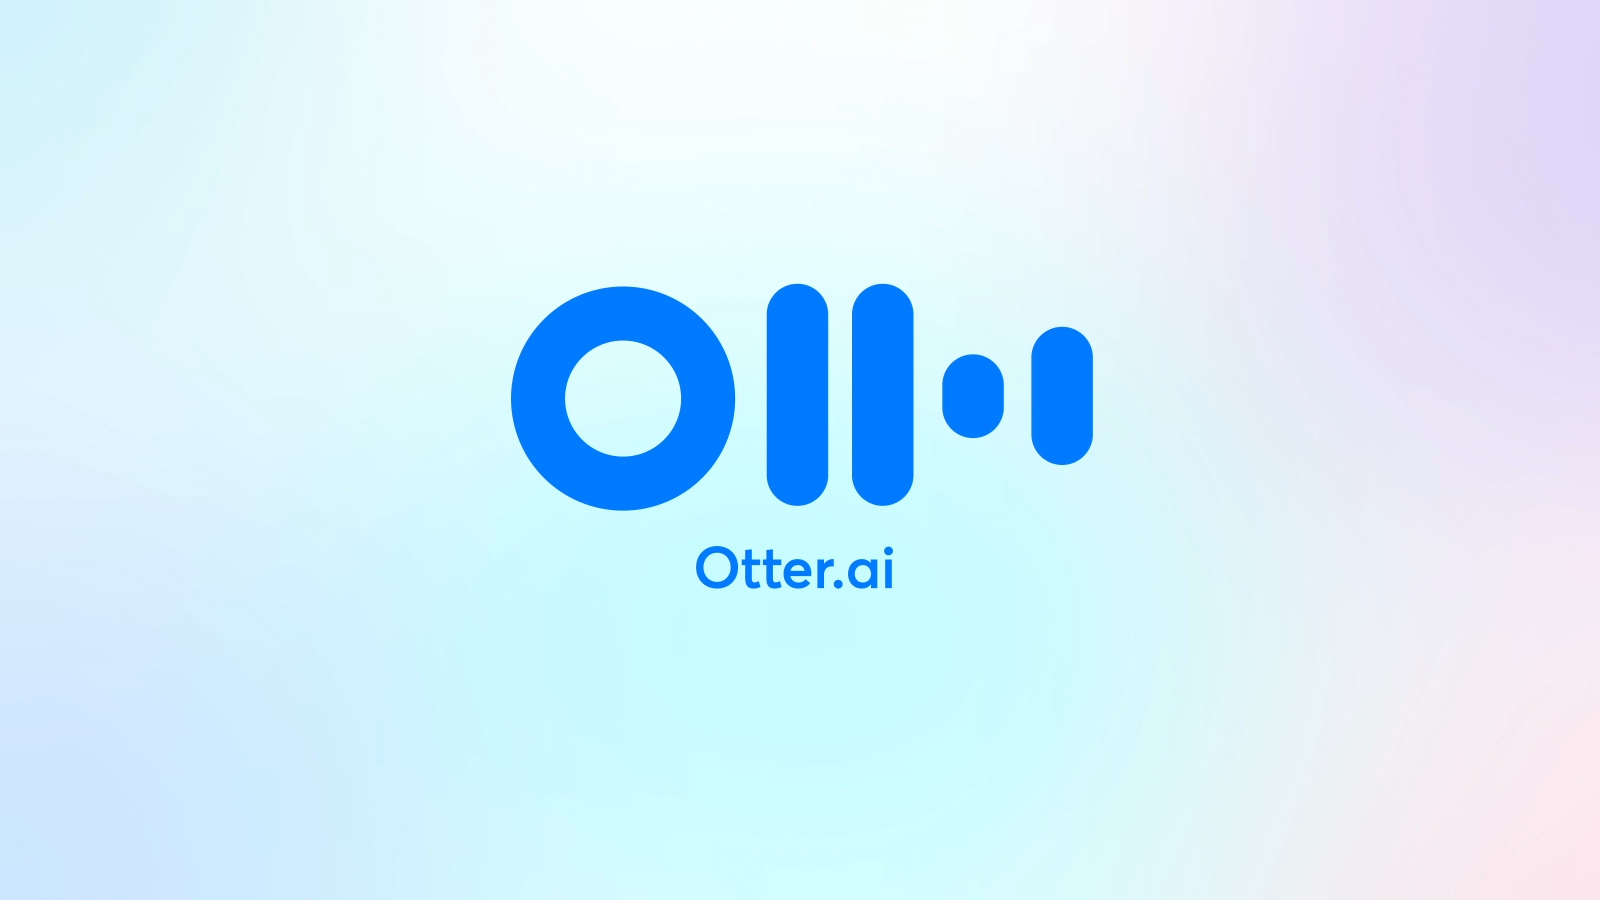 Otter.ai Revolutionizes Sales with Groundbreaking AI Assistant: Now Companies Can Leverage AI to Generate More Revenue by Increasing Productivity by Up to 33% | Business Wire